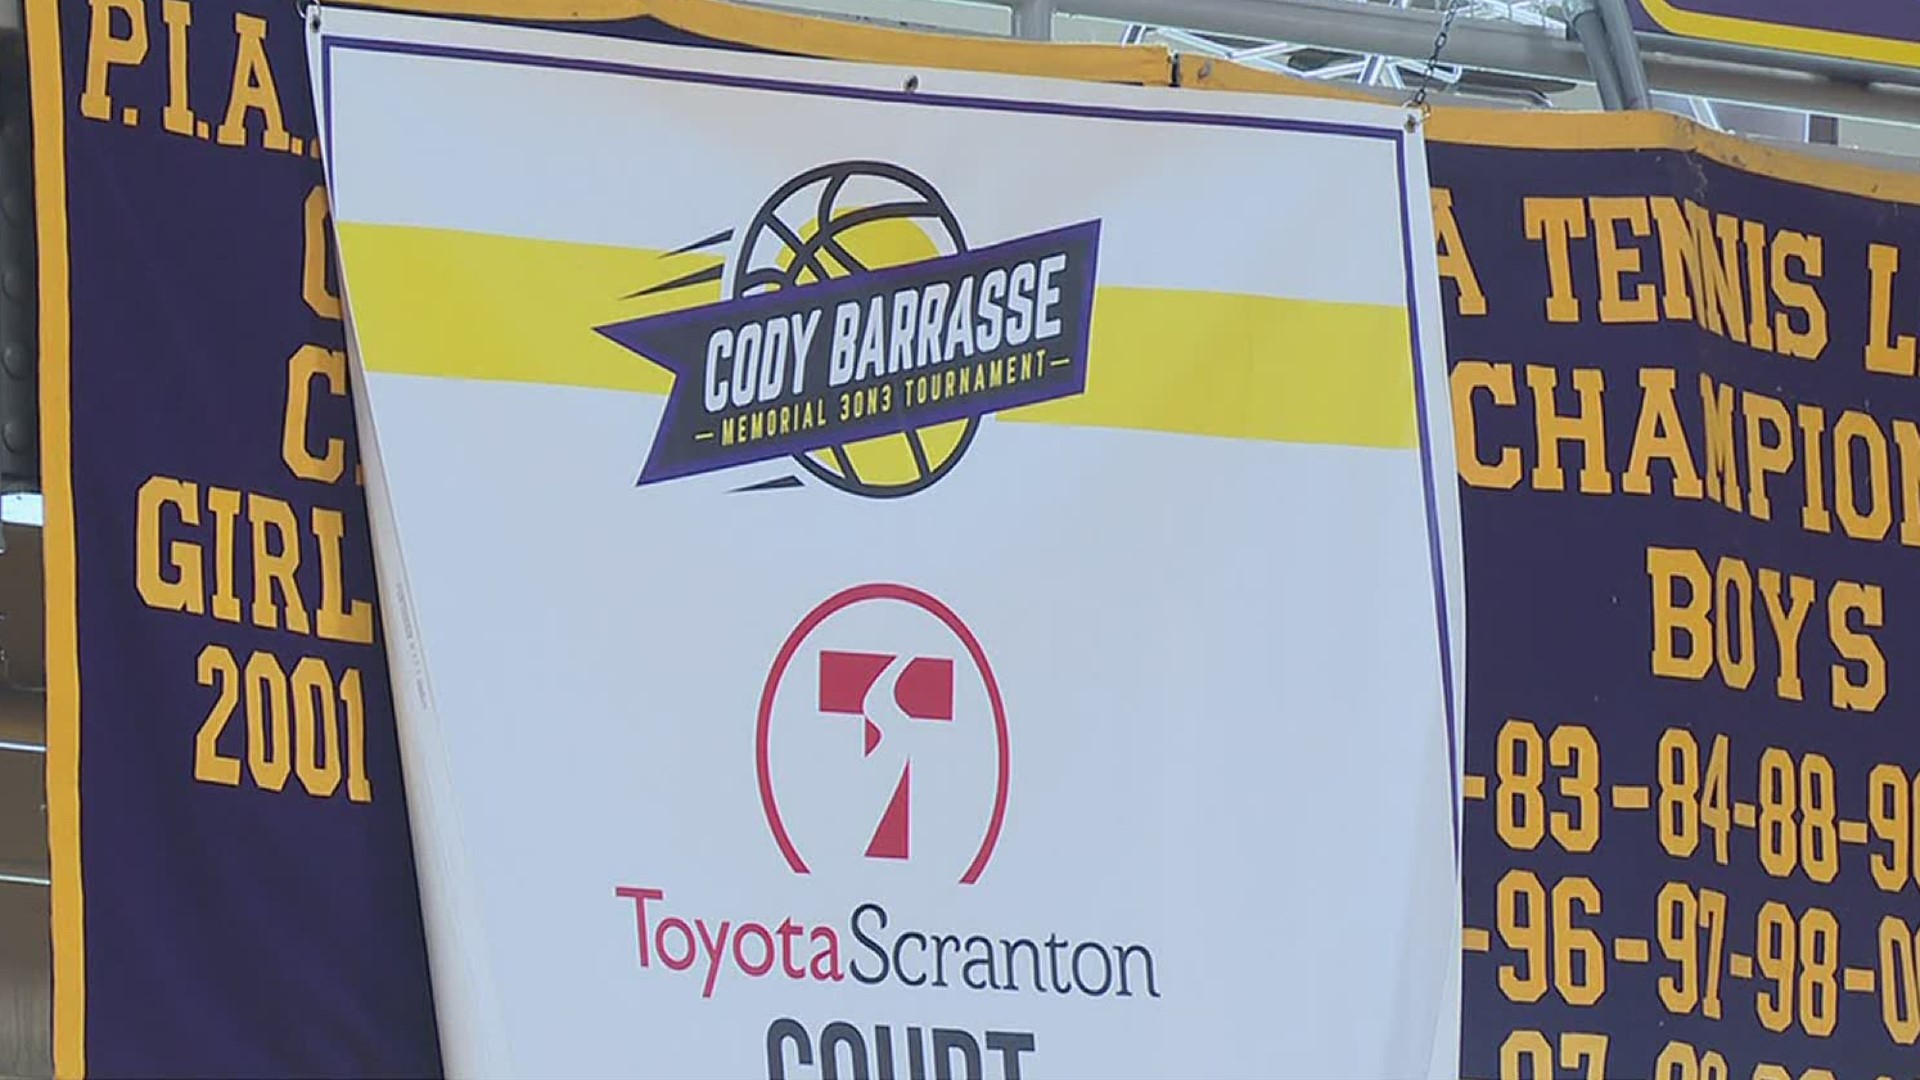 The event Saturday benefited the Cody Barrasse Foundation, which his family started to raise money for a scholarship and also help cover costs for organ recipients.